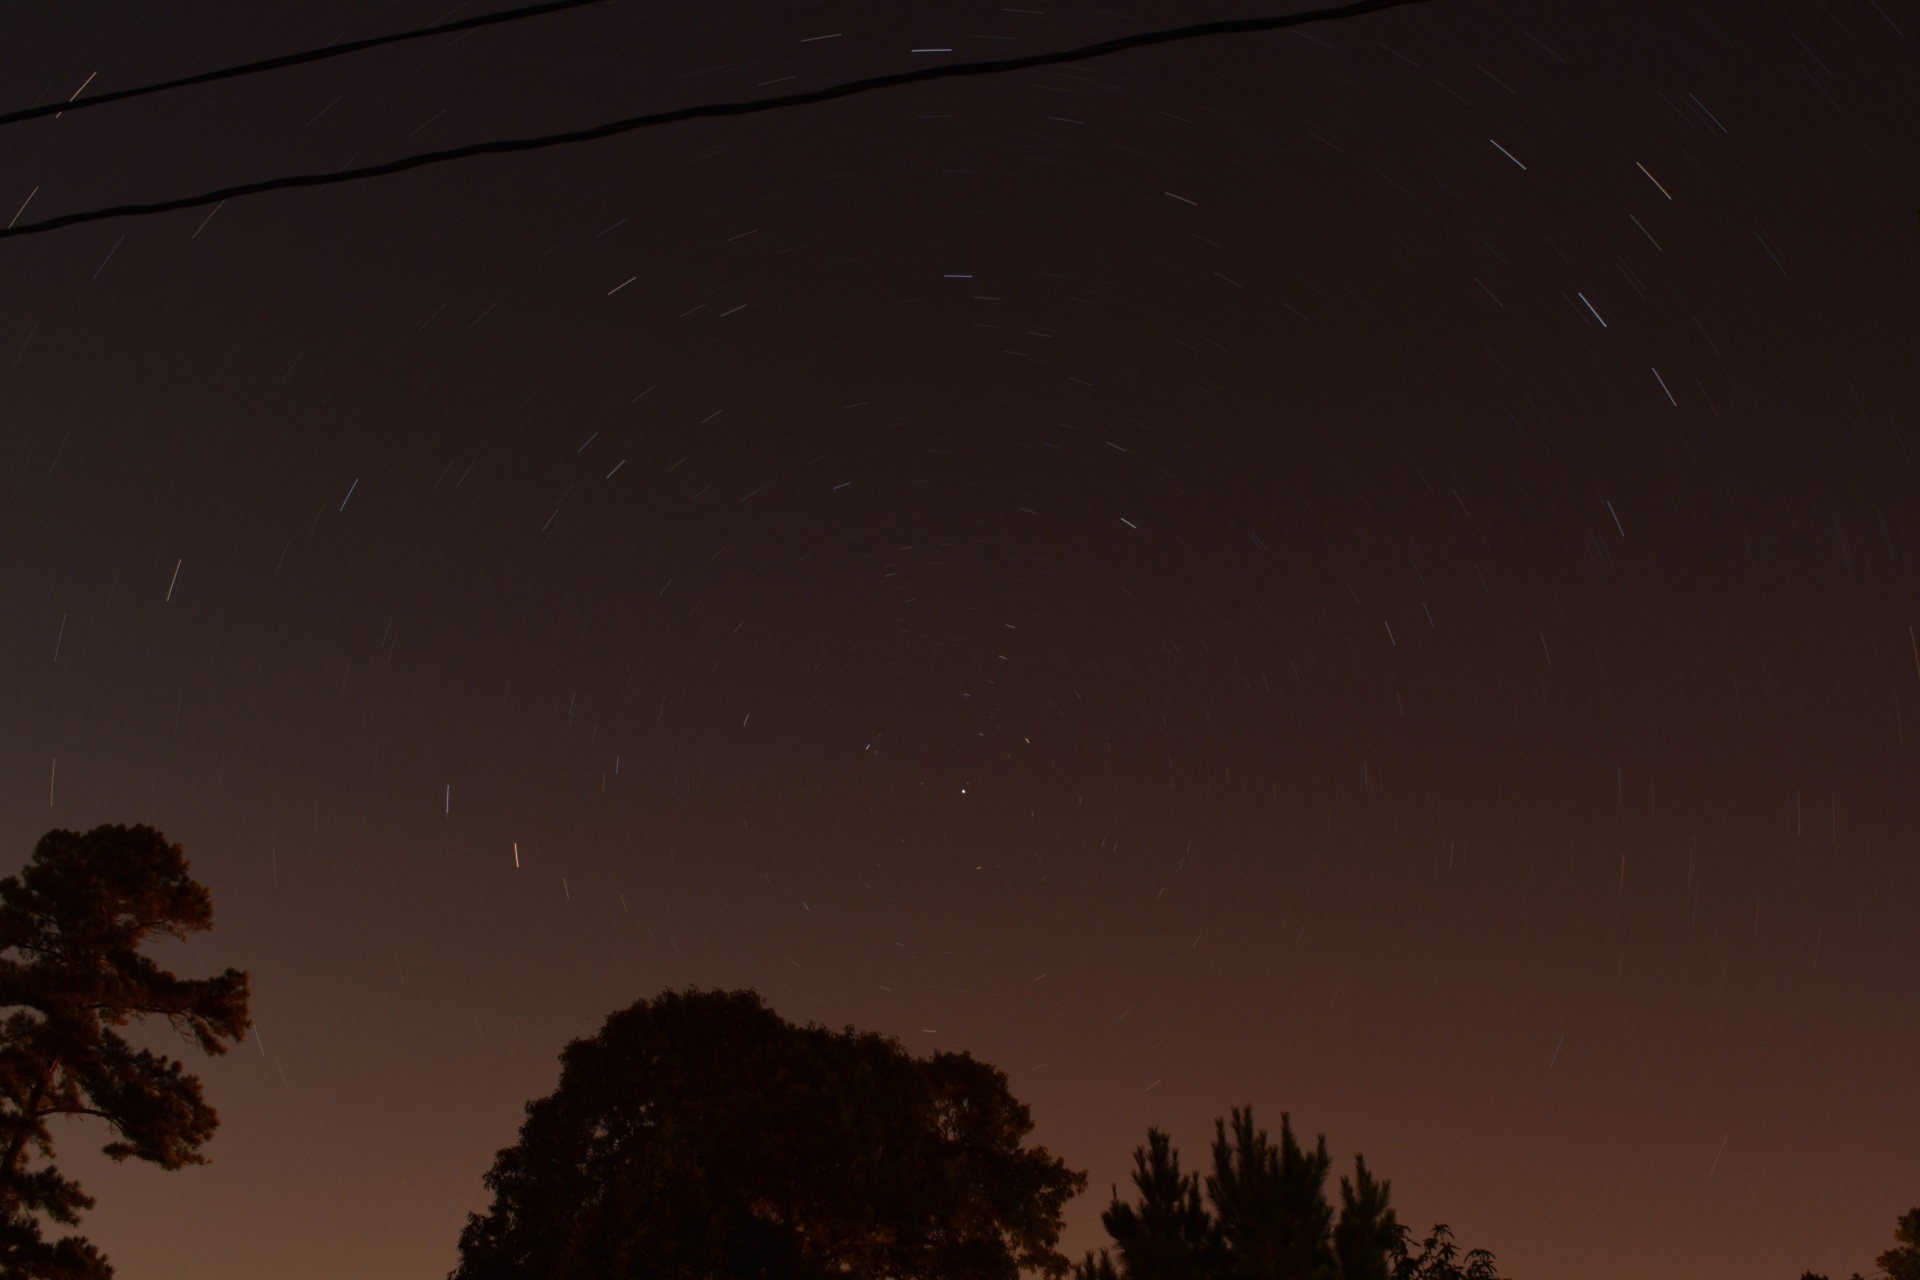 Stars forming a curving trail of light as the earth rotates, including some trees and a power line in the foreground. Polaris is not quite center, and is the star the others seem to spin around it. Single shot image, long exposure.